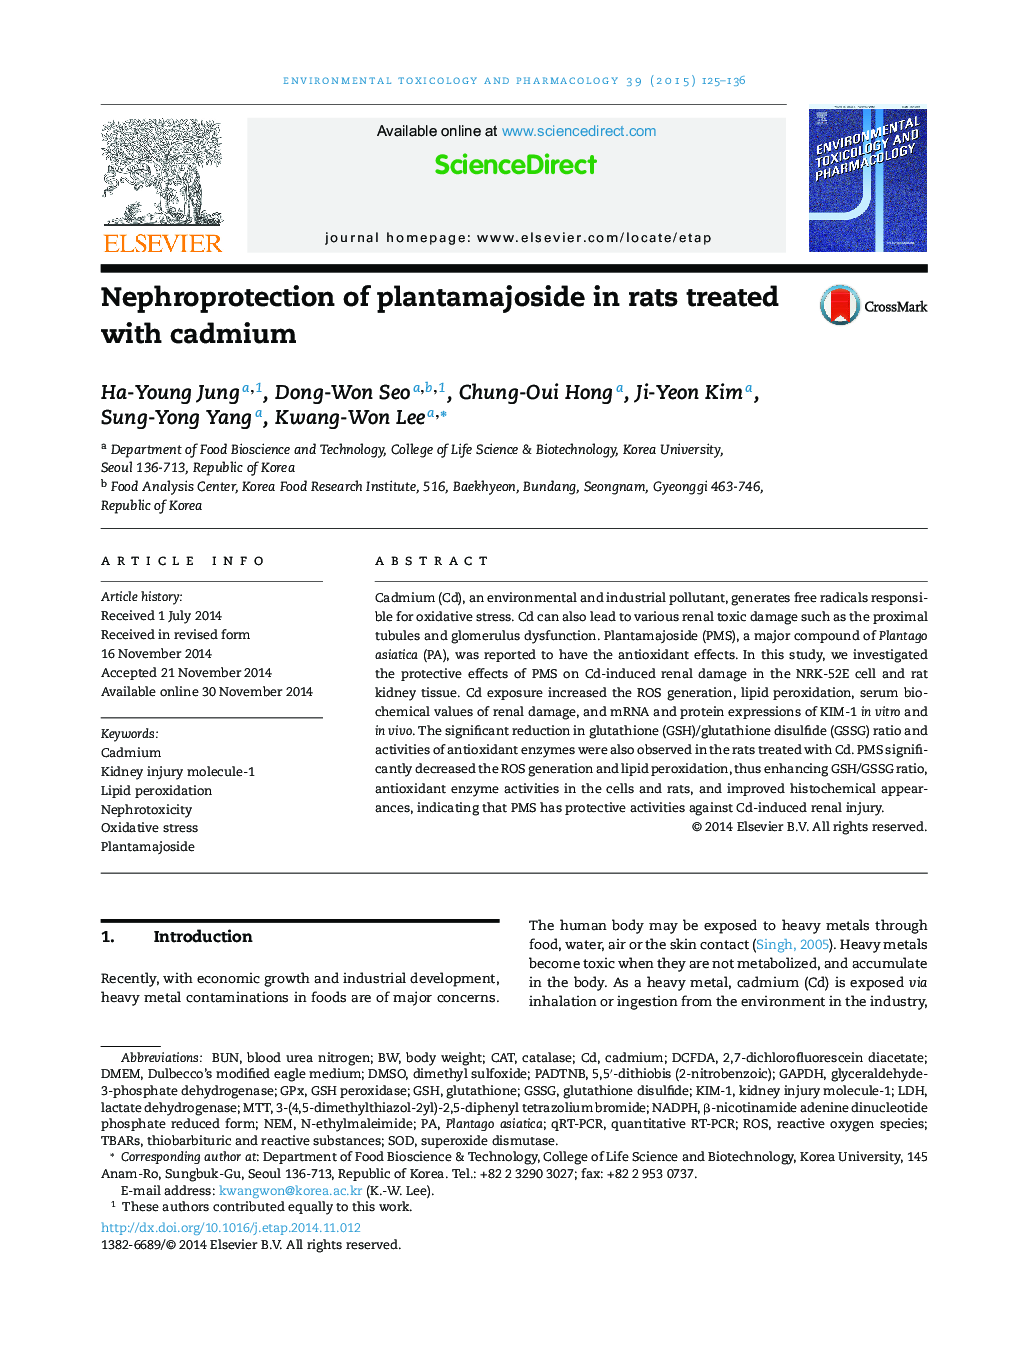 Nephroprotection of plantamajoside in rats treated with cadmium